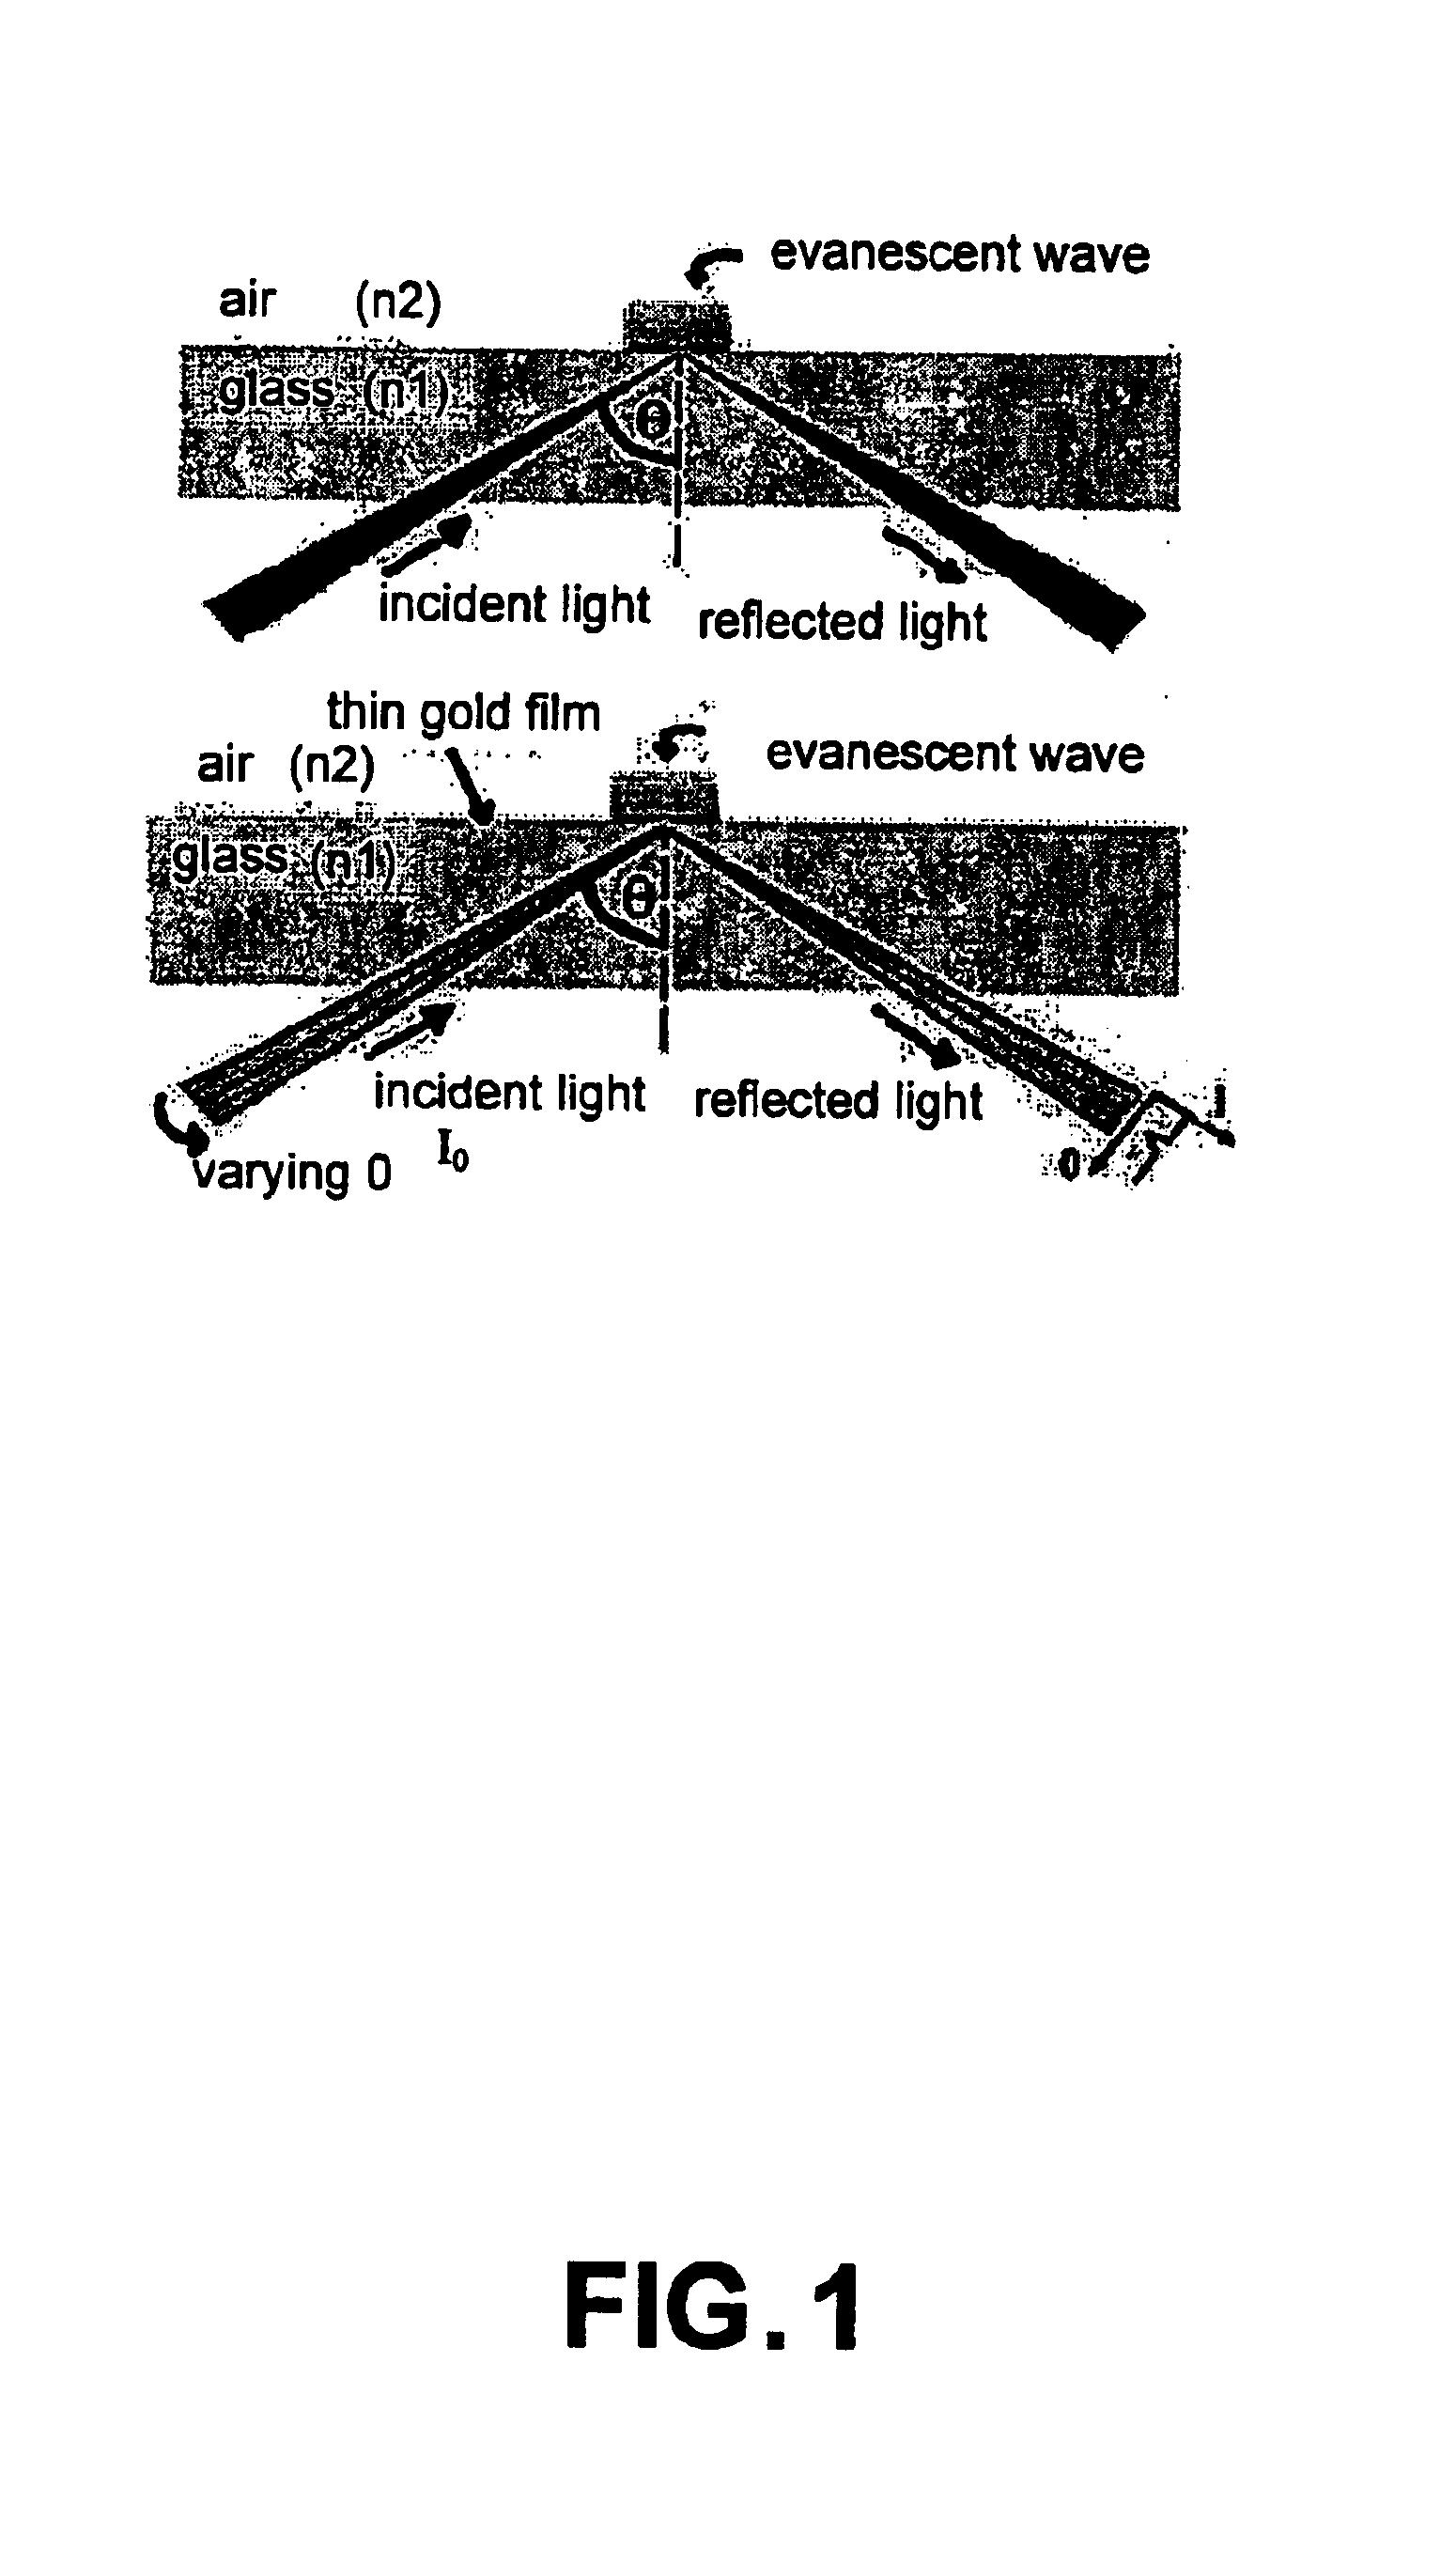 Bioanalysis systems including optical integrated circuit